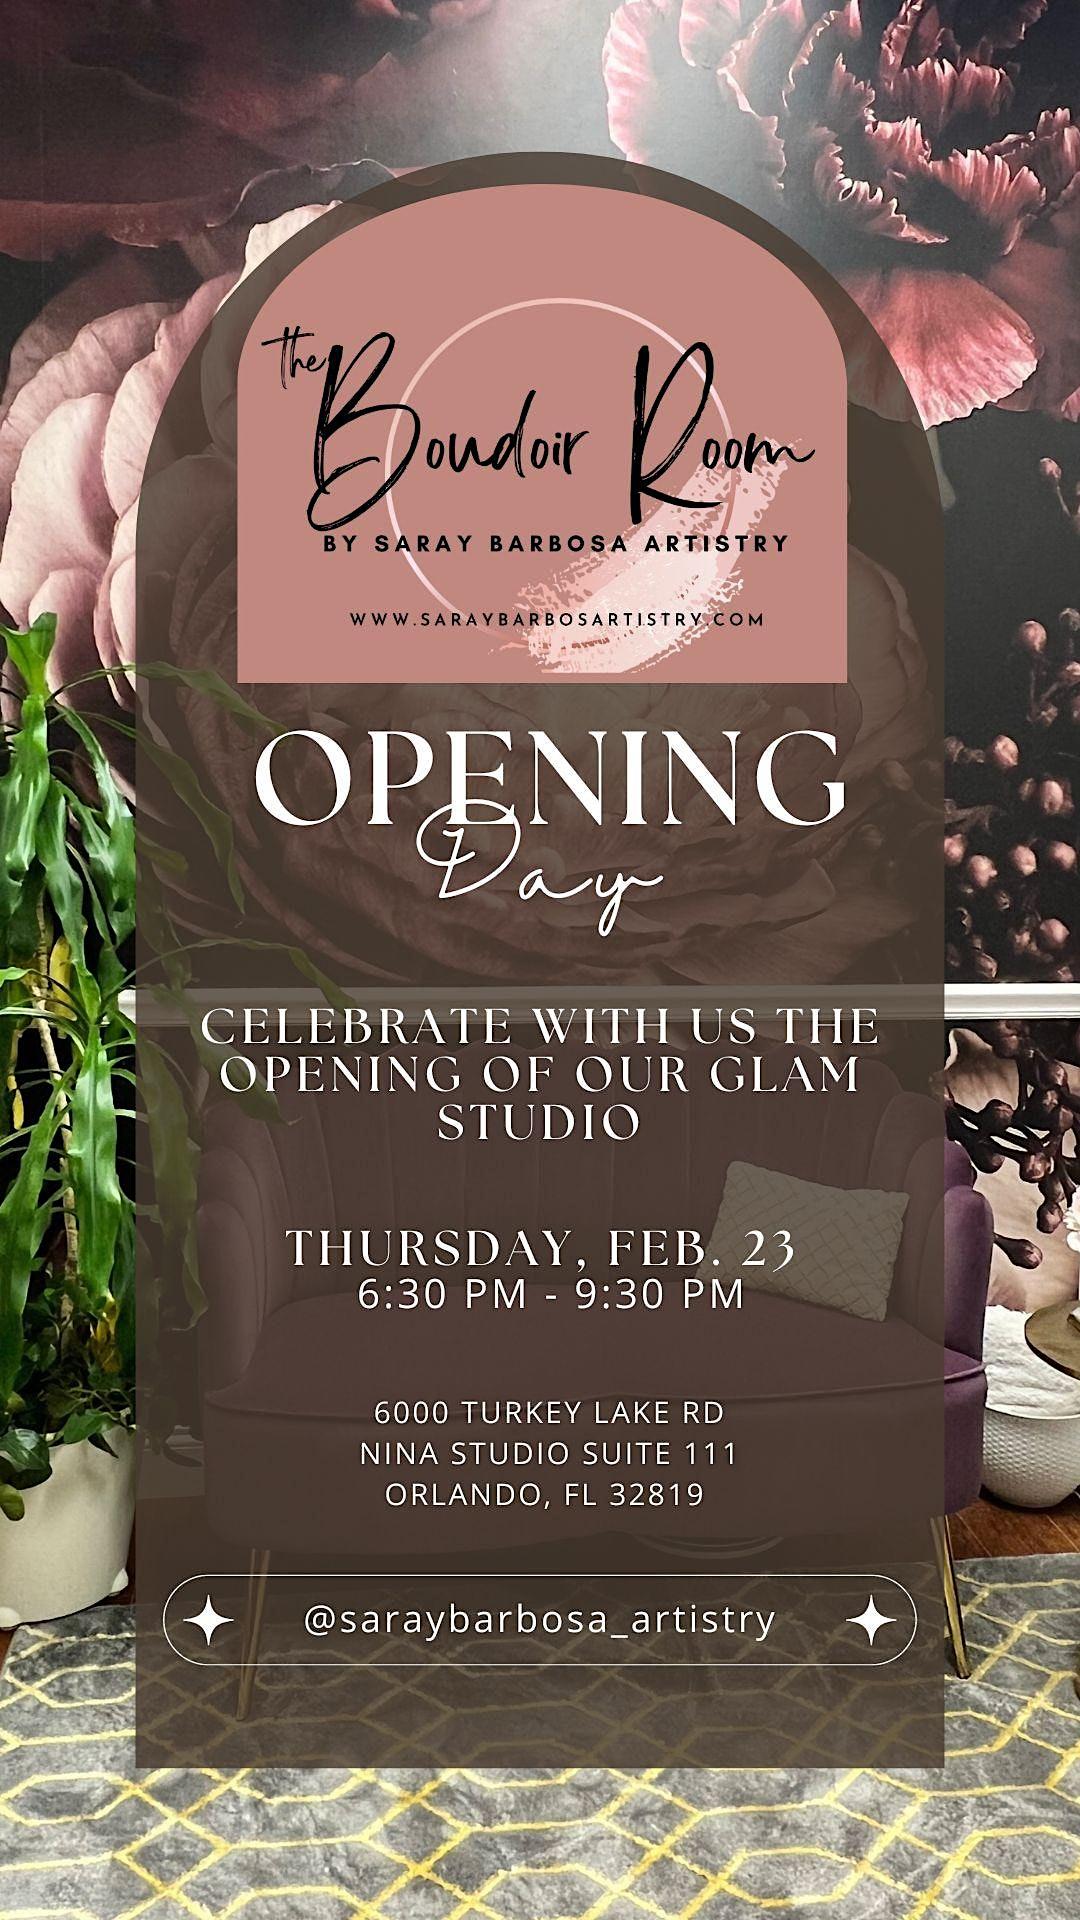 the Boudoir Room by Saray Barbosa Artistry GRAND OPENING